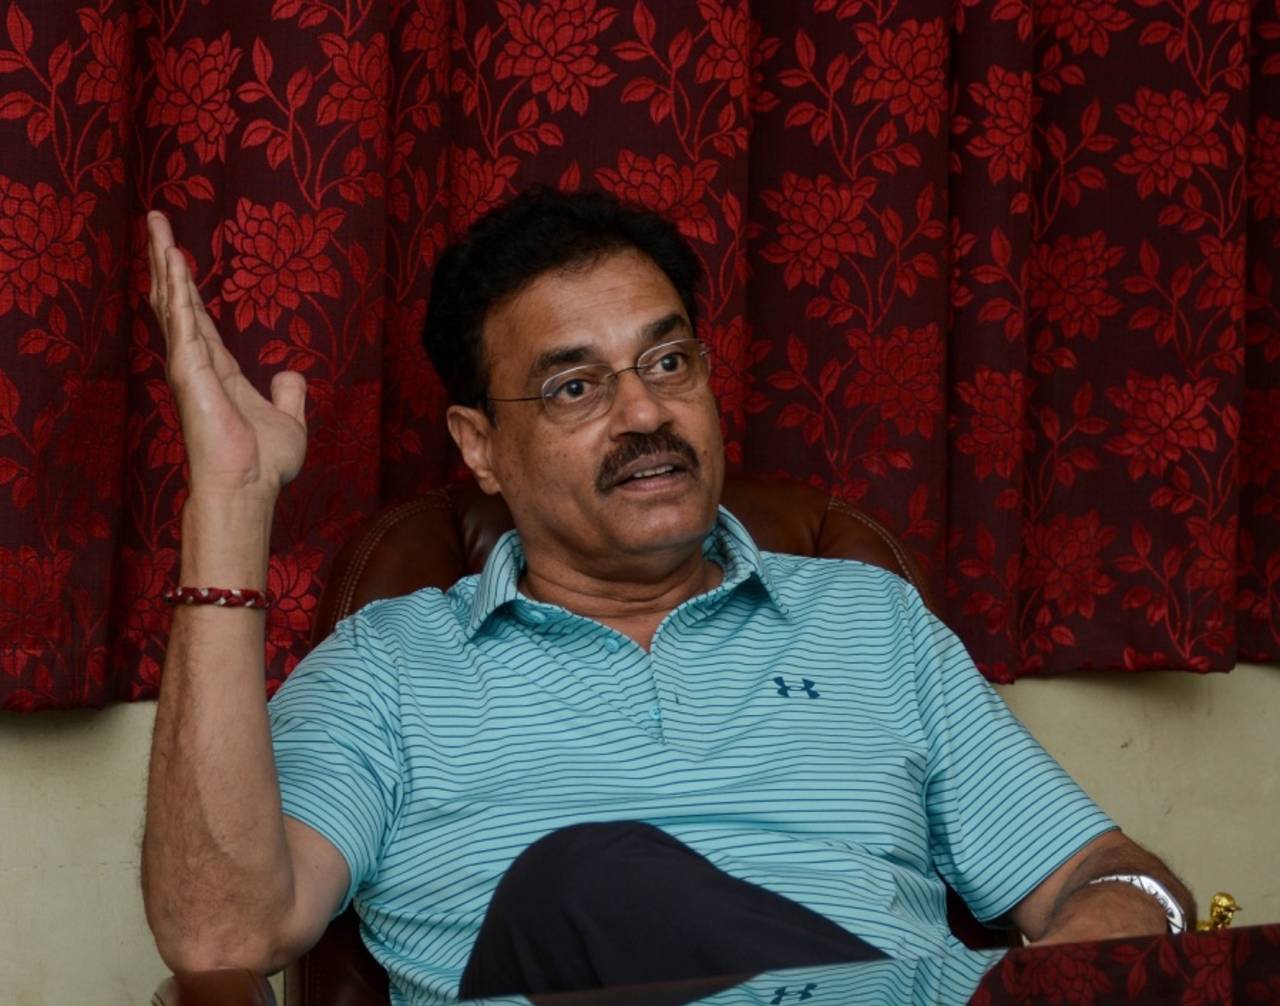 Dilip Vengsarkar received 402 votes to Ashok Malhotra's 230 in an online election held over three days&nbsp;&nbsp;&bull;&nbsp;&nbsp;Getty Images